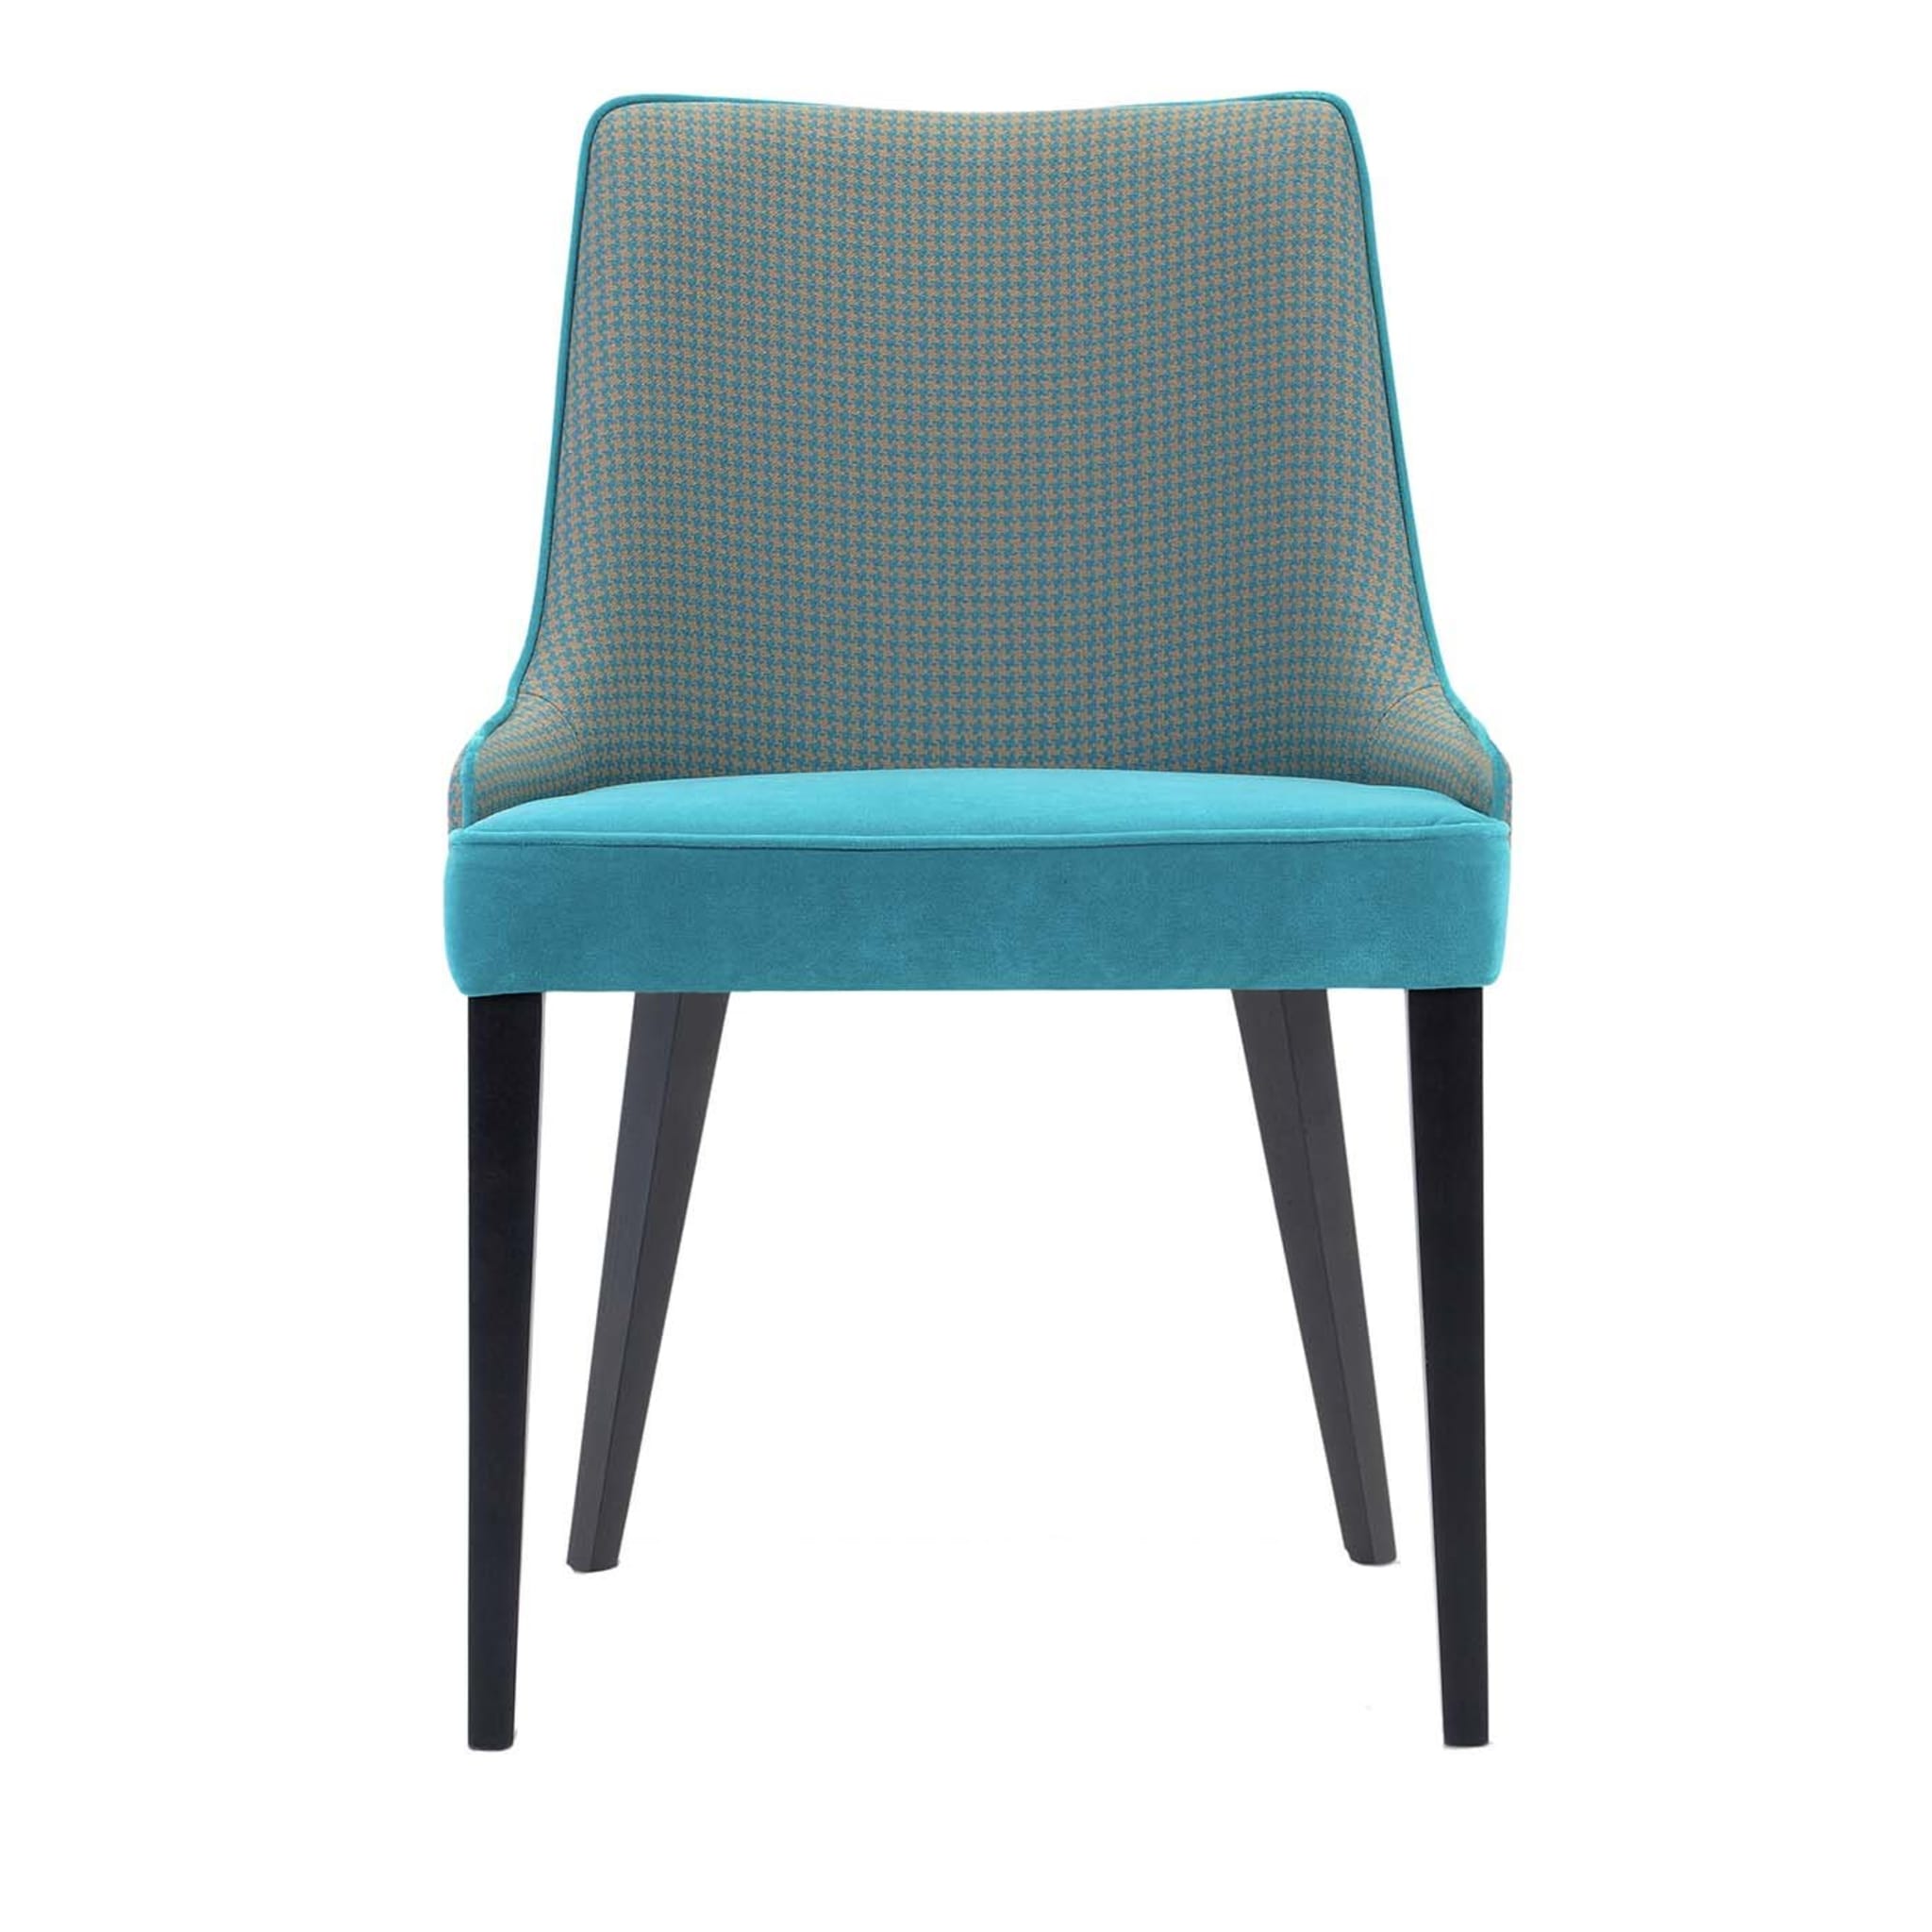 Pat Turquoise/Gray Chair - Main view